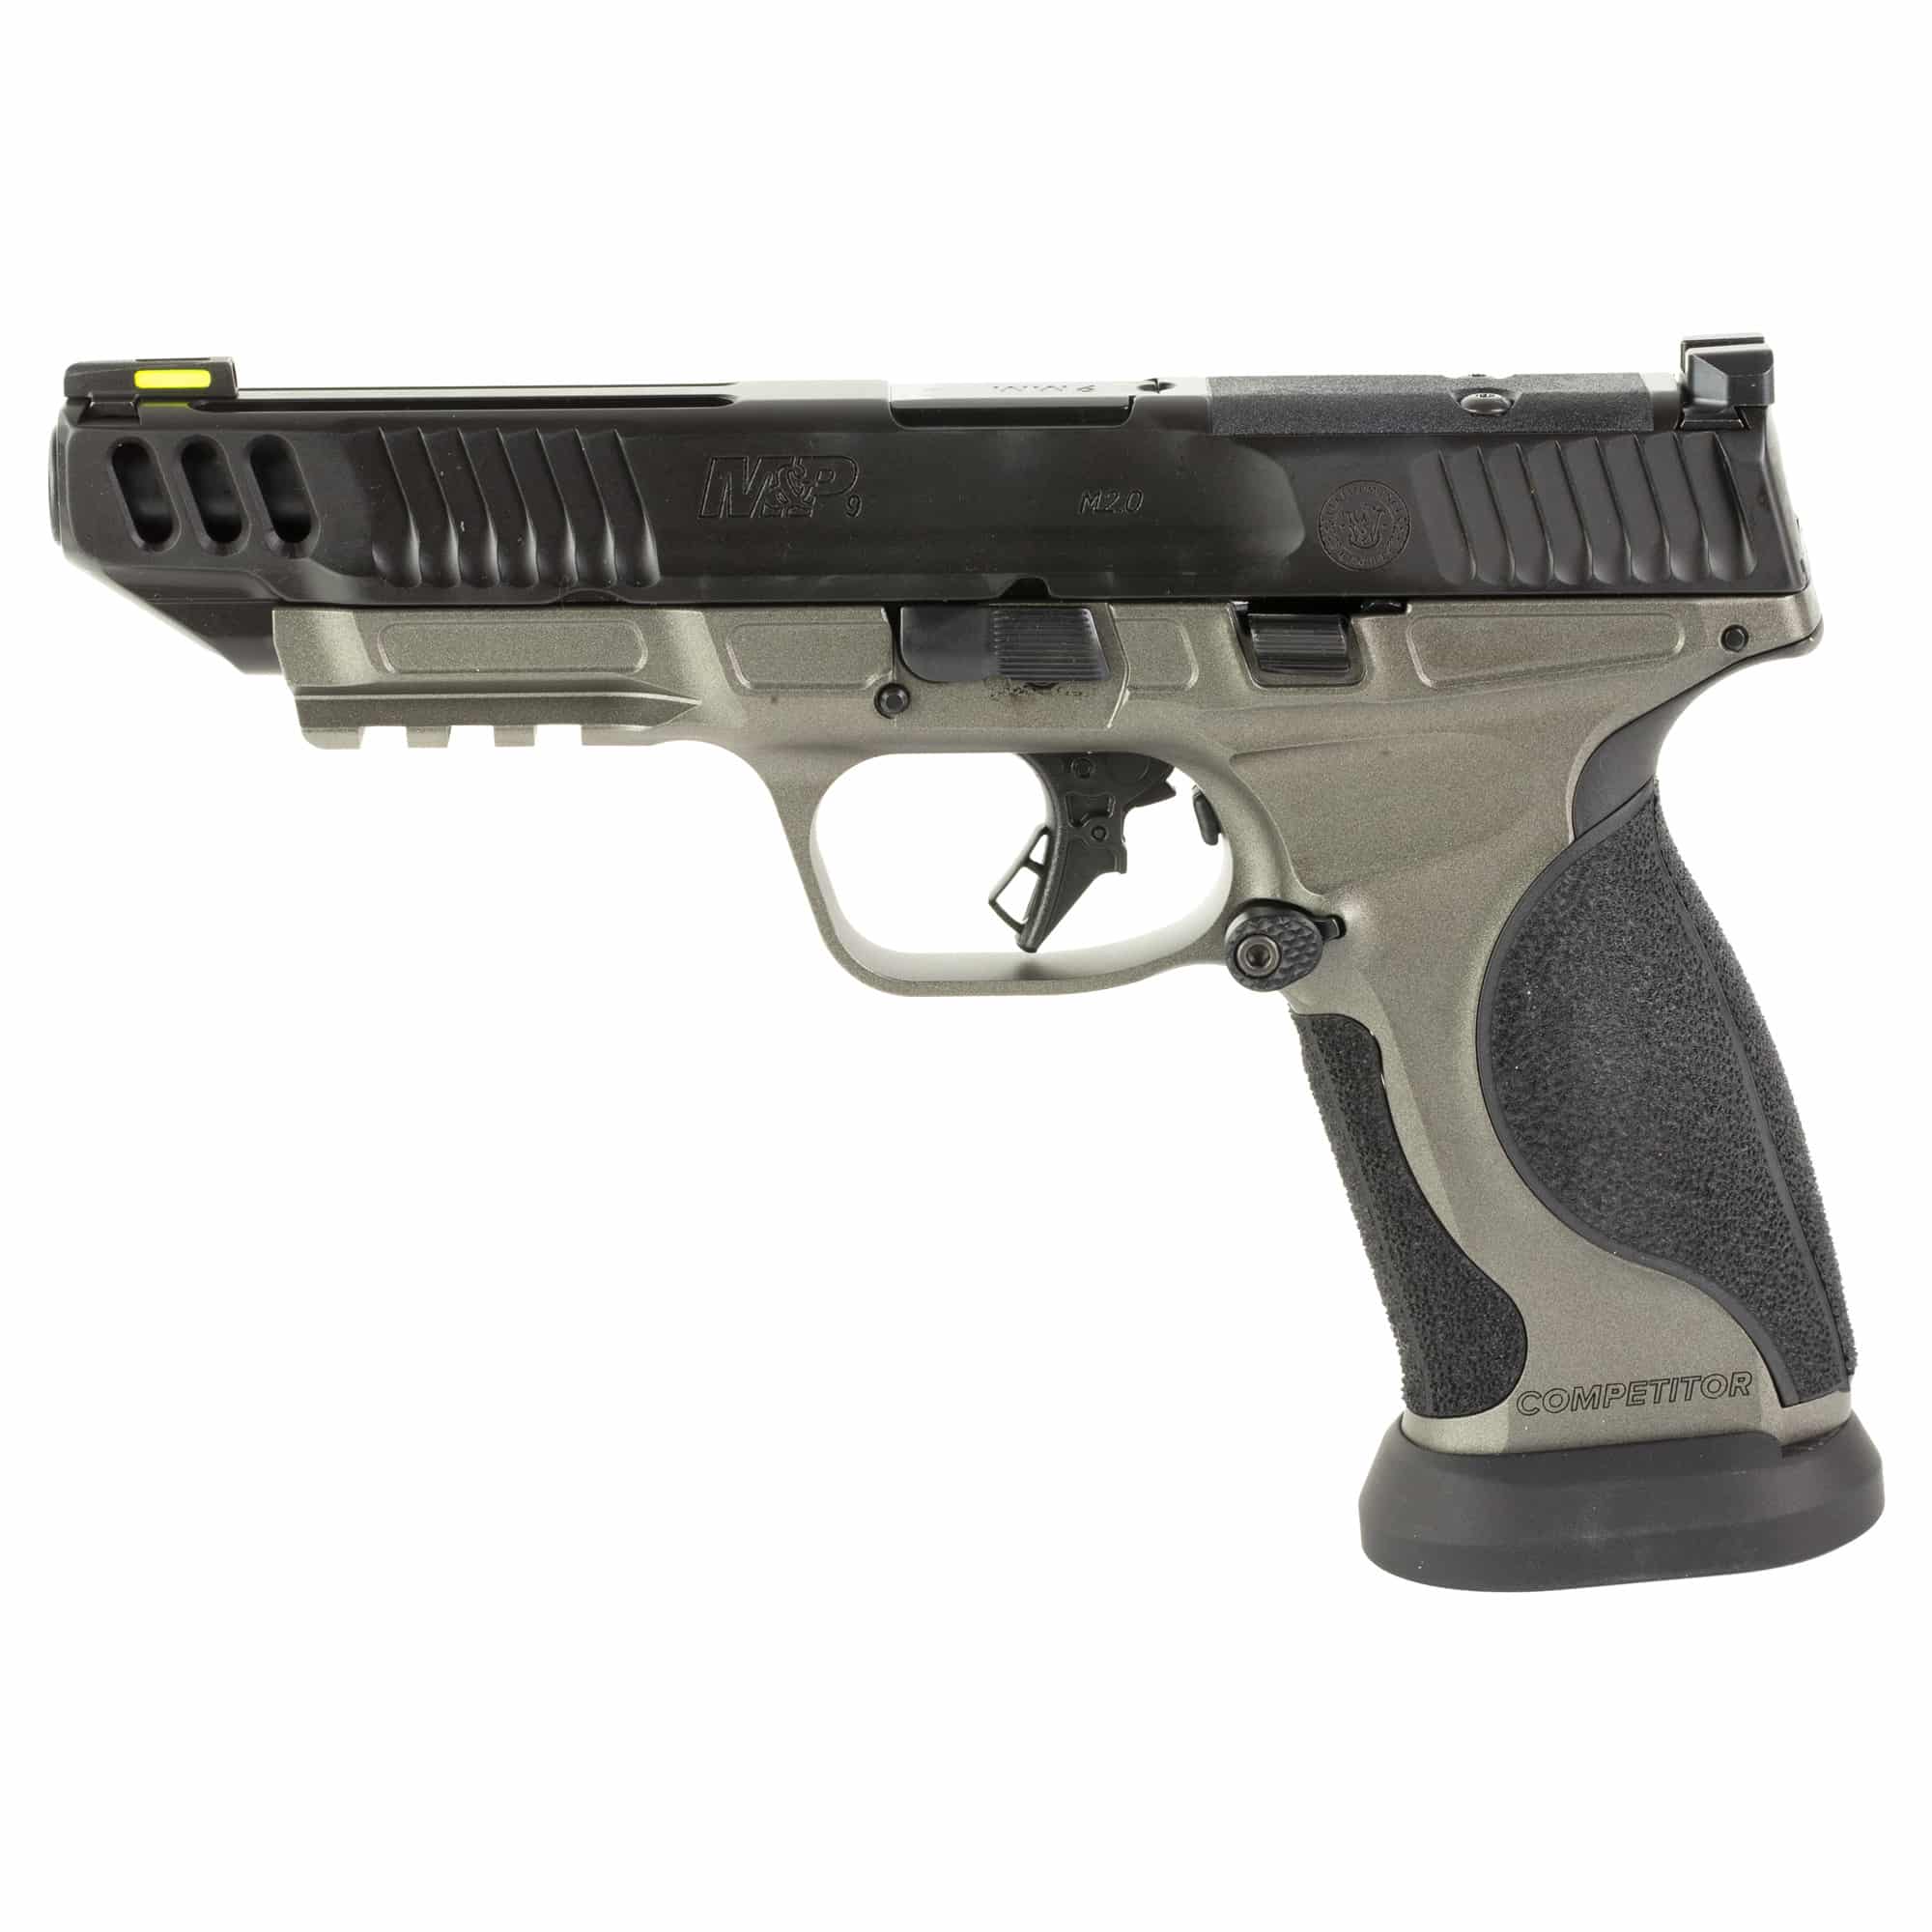 https://cityarsenal.com/product/smith-wesson-mp-m2-0-competitor-9mm-metal-frame-pistol-tungsten-gray-13718/